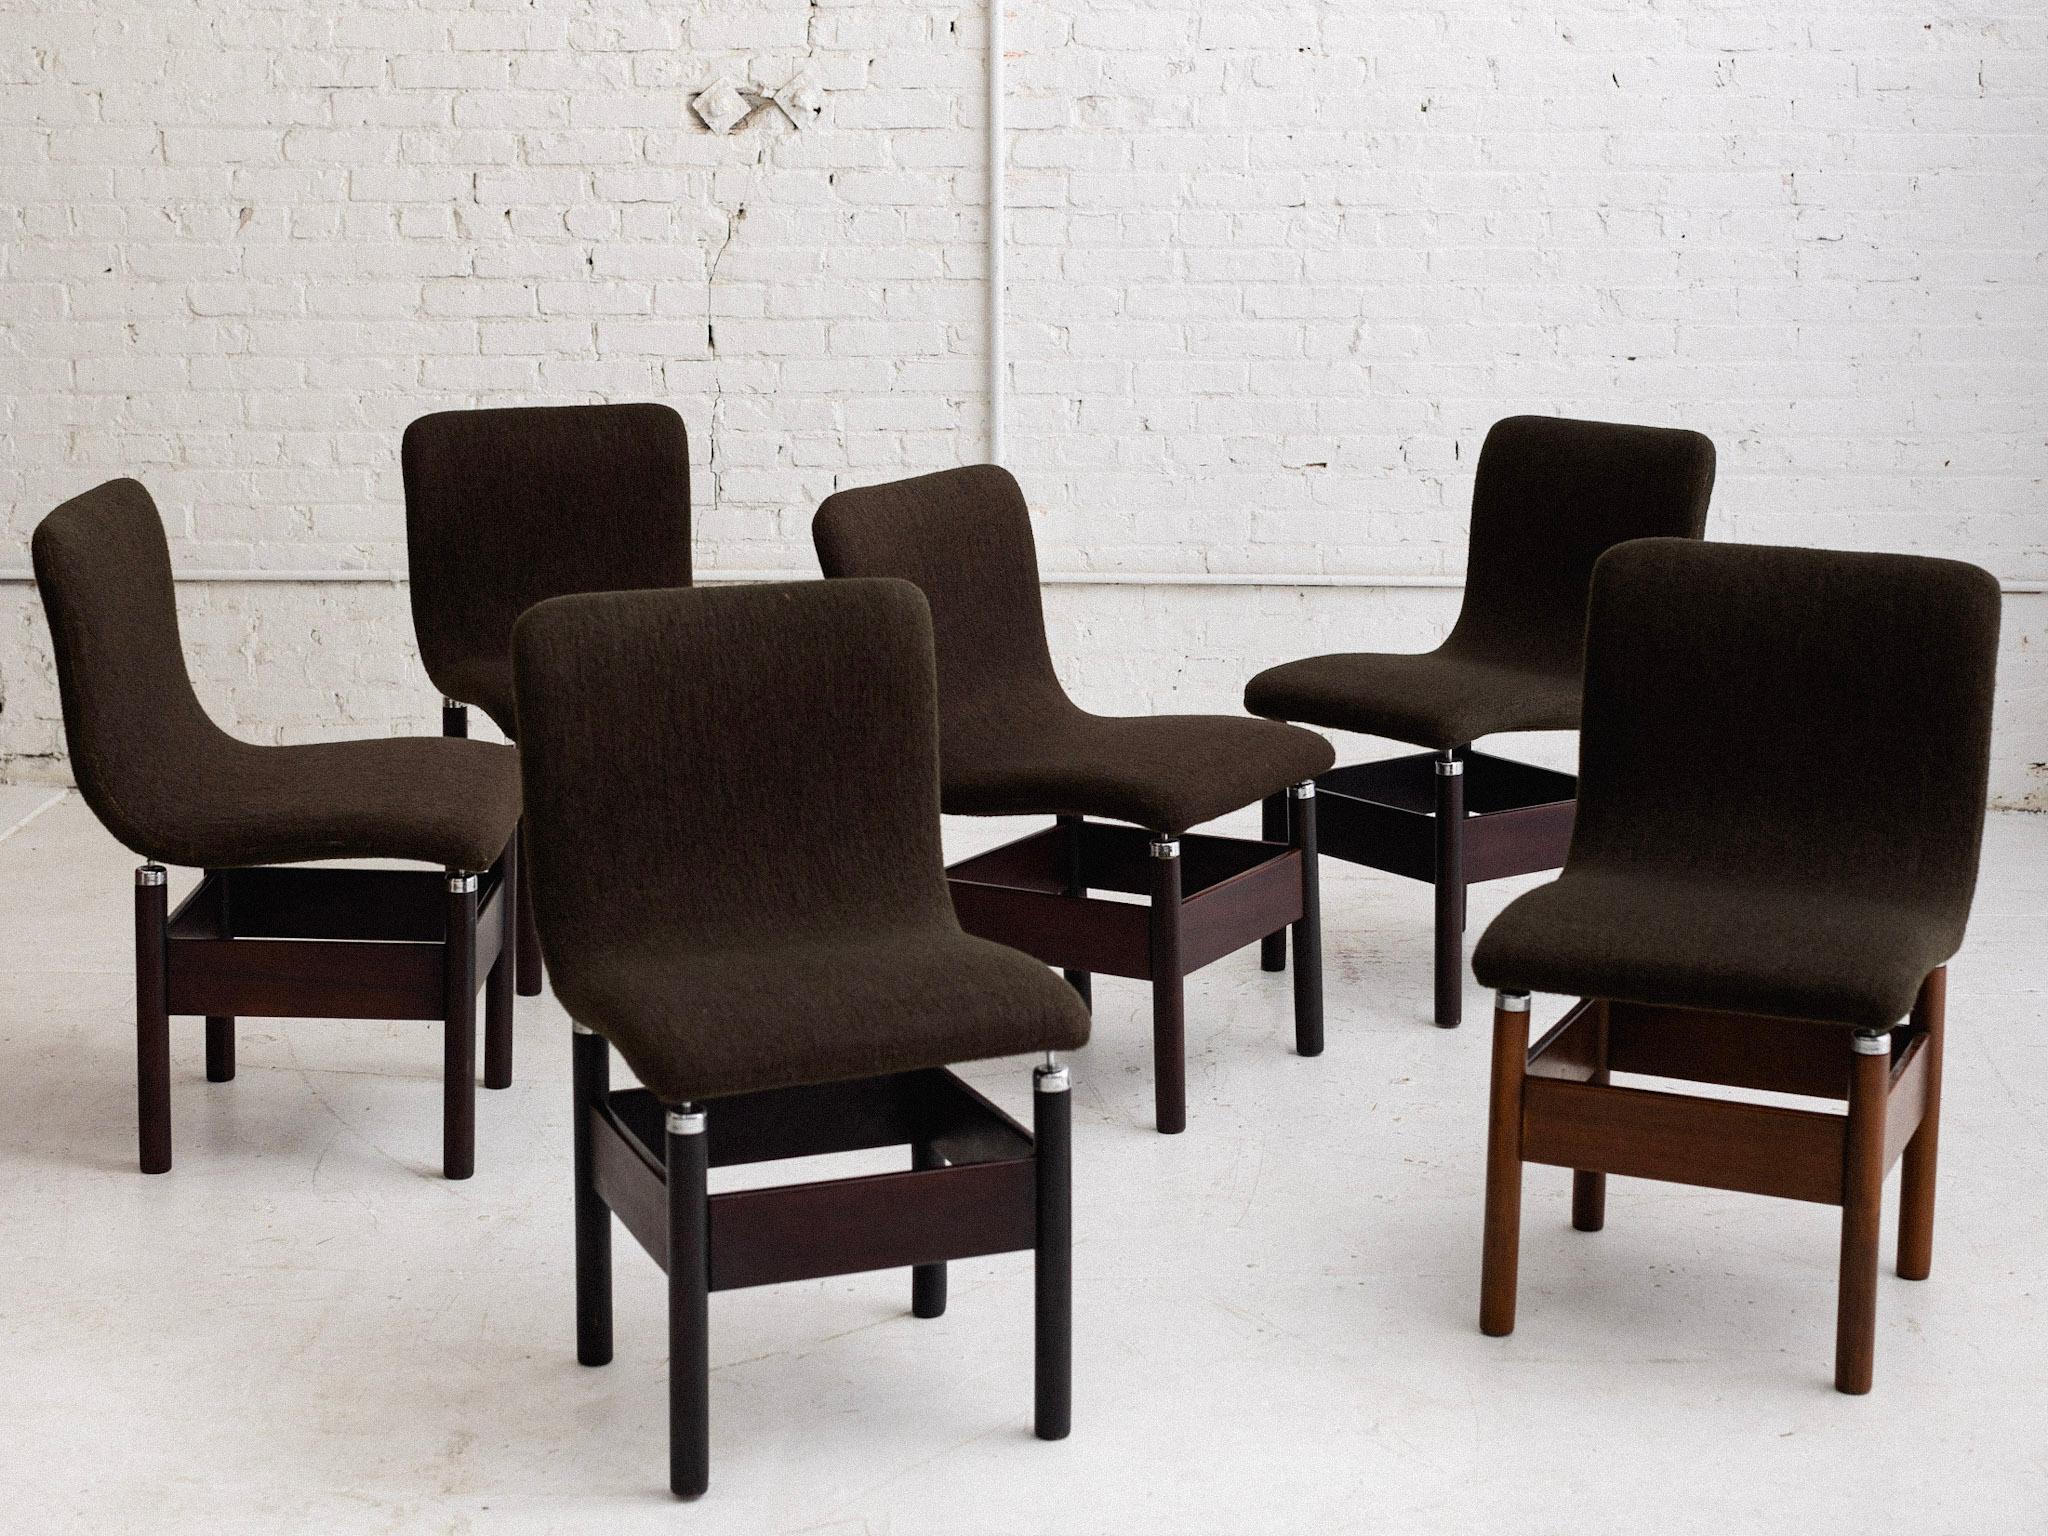 A mid century set of 6 dining chairs by Vittorio Introini for Saporiti. Dark walnut finished wood frames with original wool upholstery and chrome accents. Variations in wood color from chair to chair. Sourced in Northern Italy.